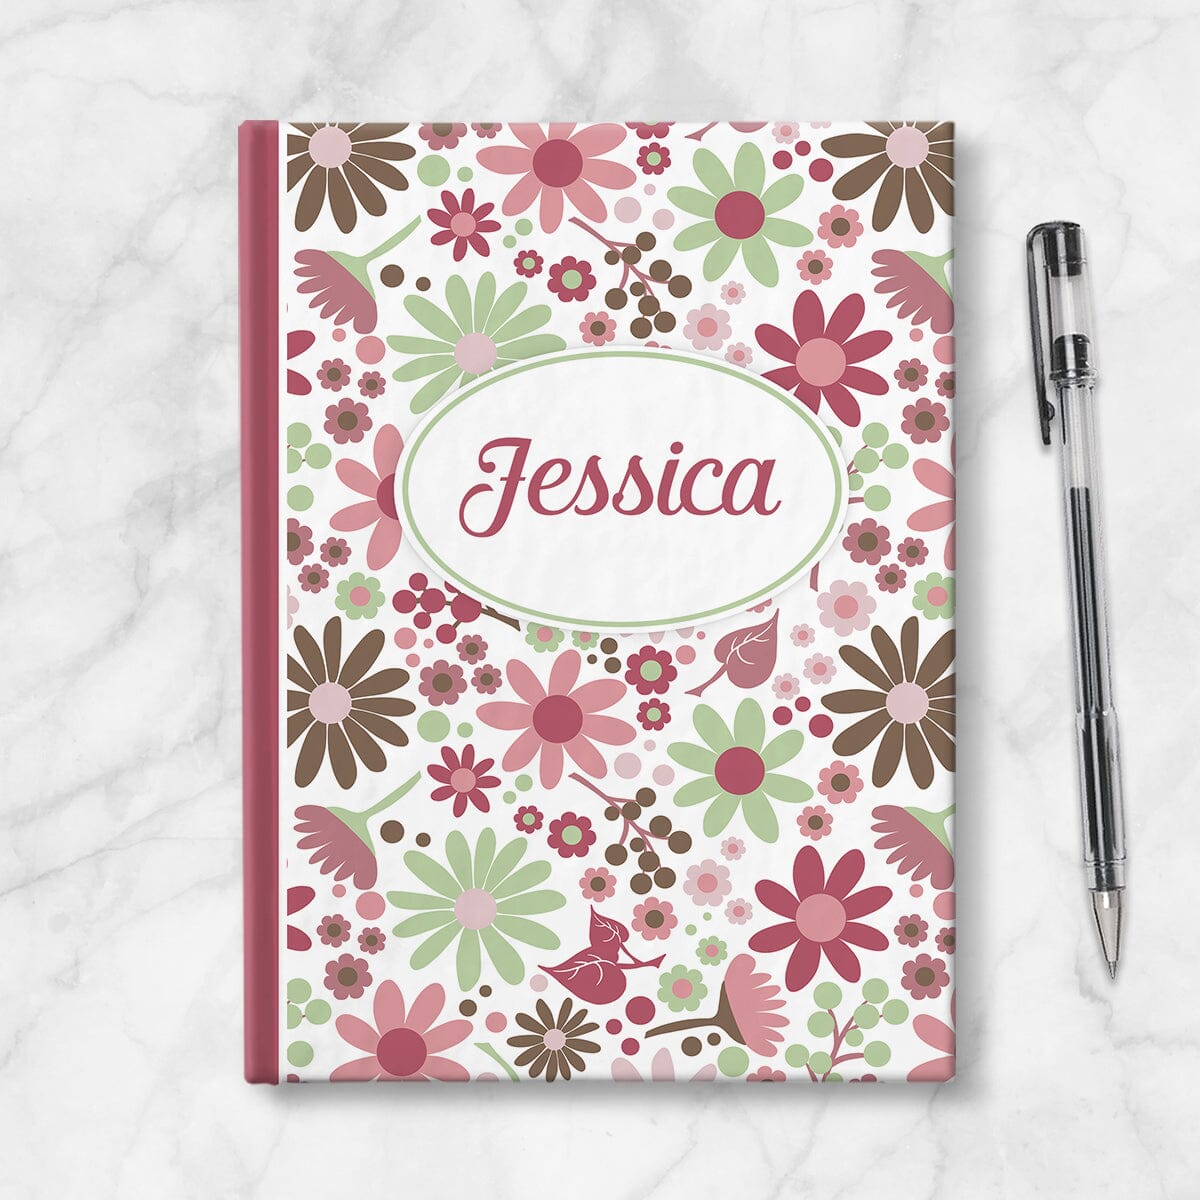 Personalized Berry Green Summer Flowers Journal at Artistically Invited. Image shows the book on a countertop next to a pen.